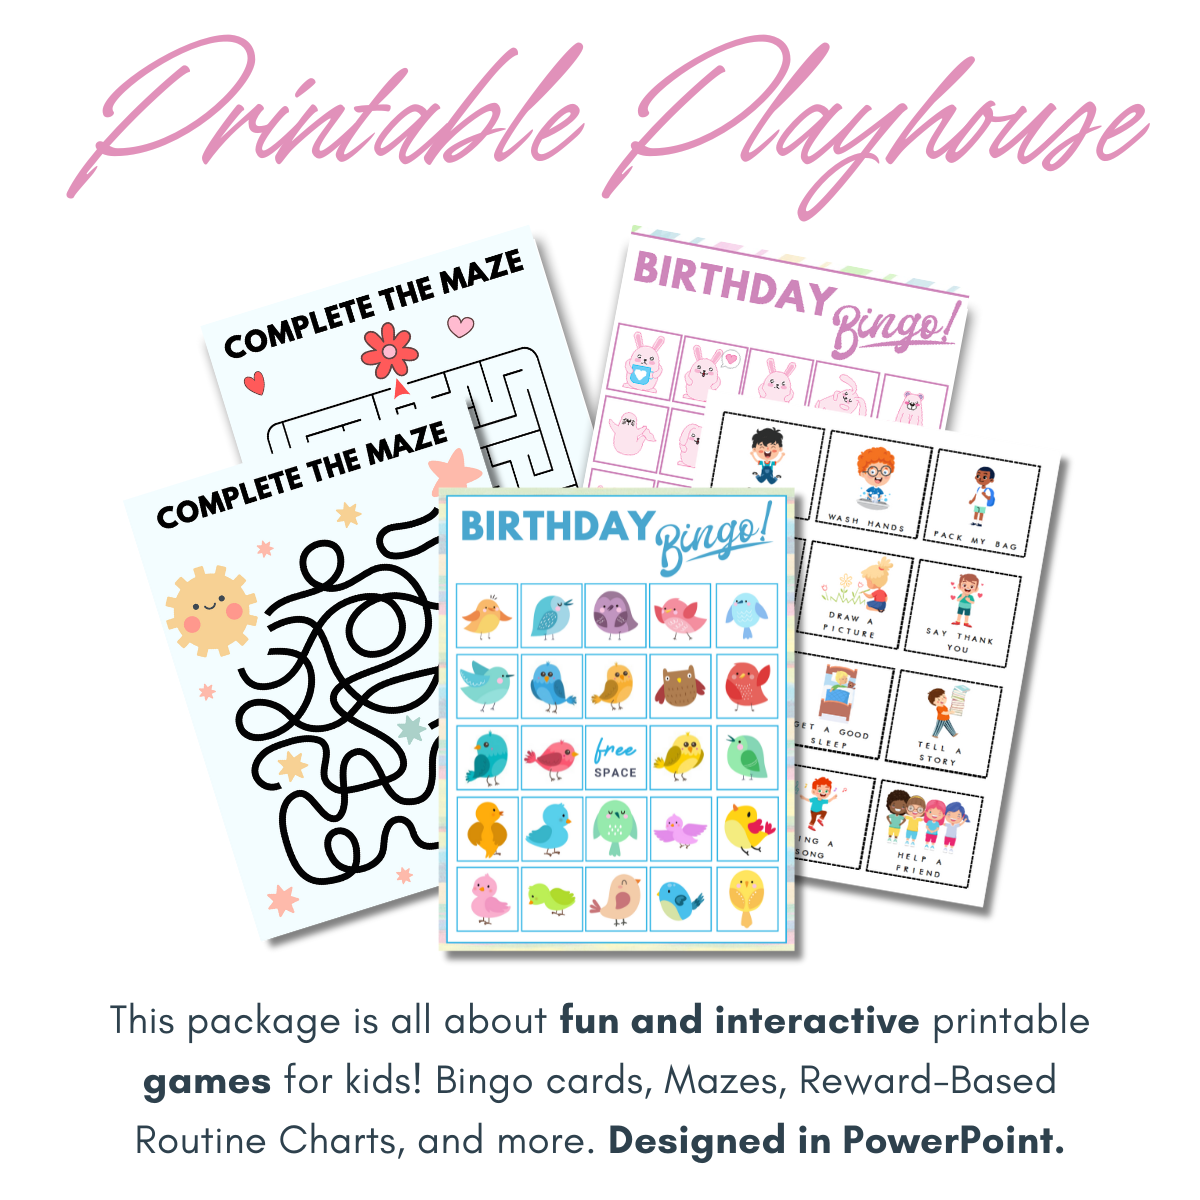 Printable Playhouse: Party Planning Pack